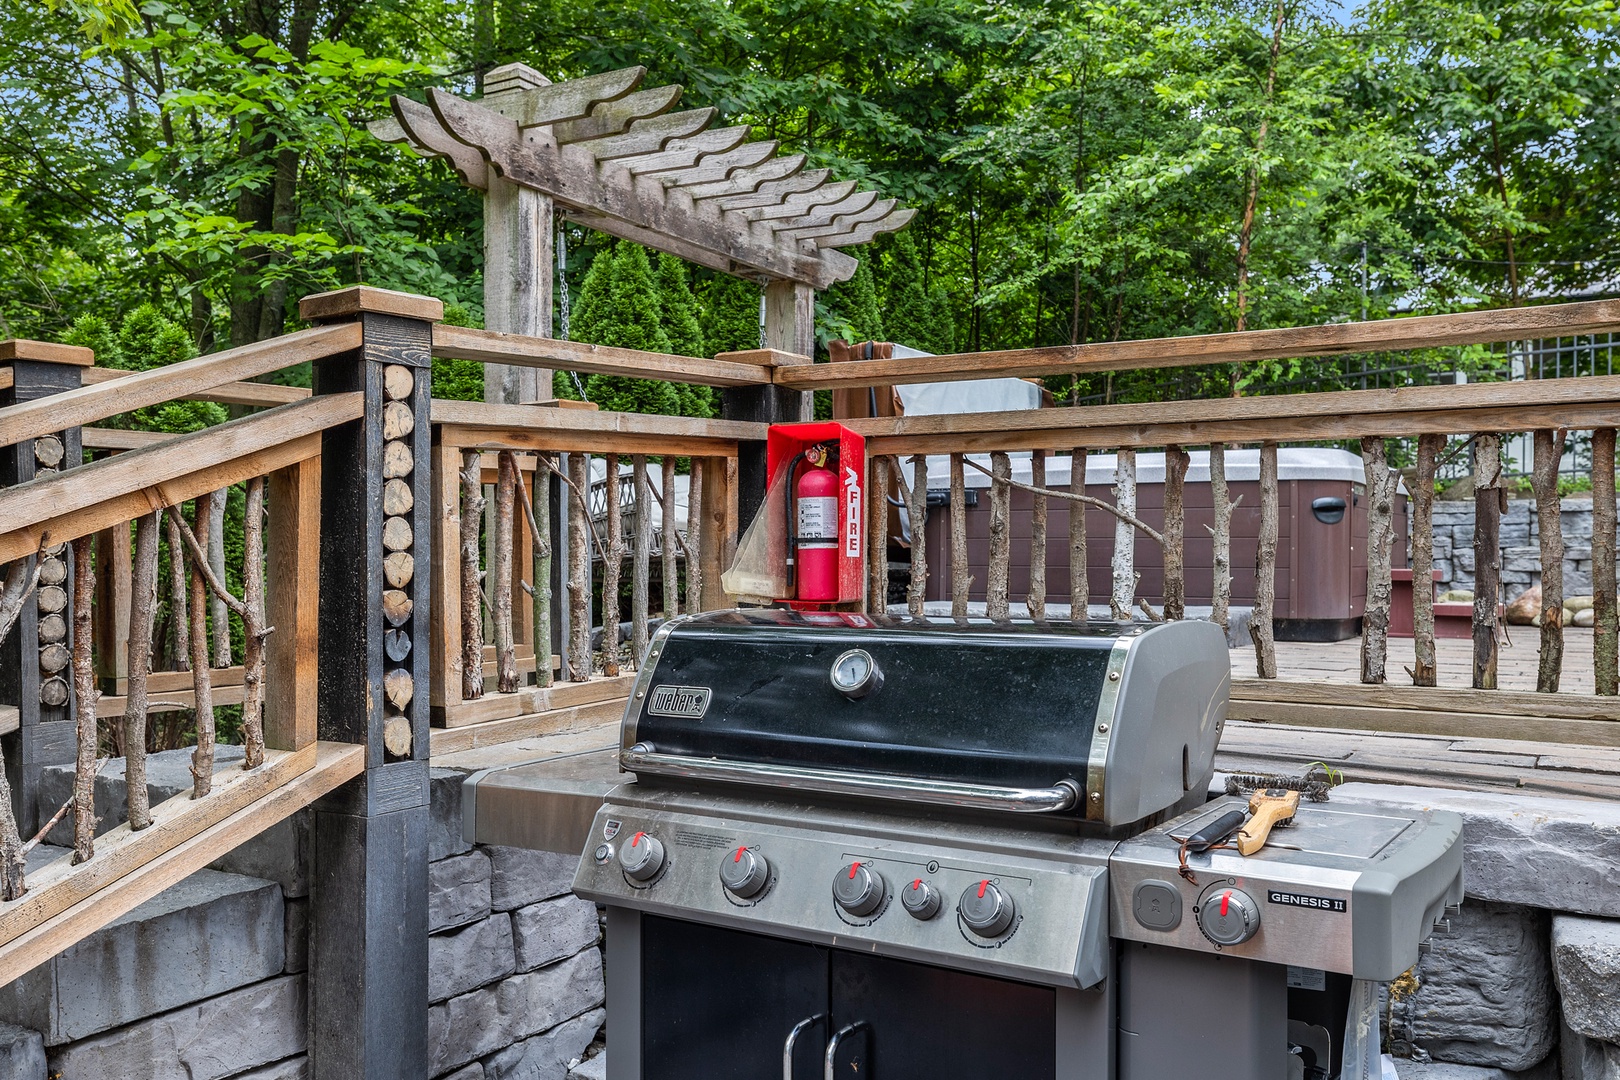 Steaks, burgers or hot dogs - our grill is at the ready!